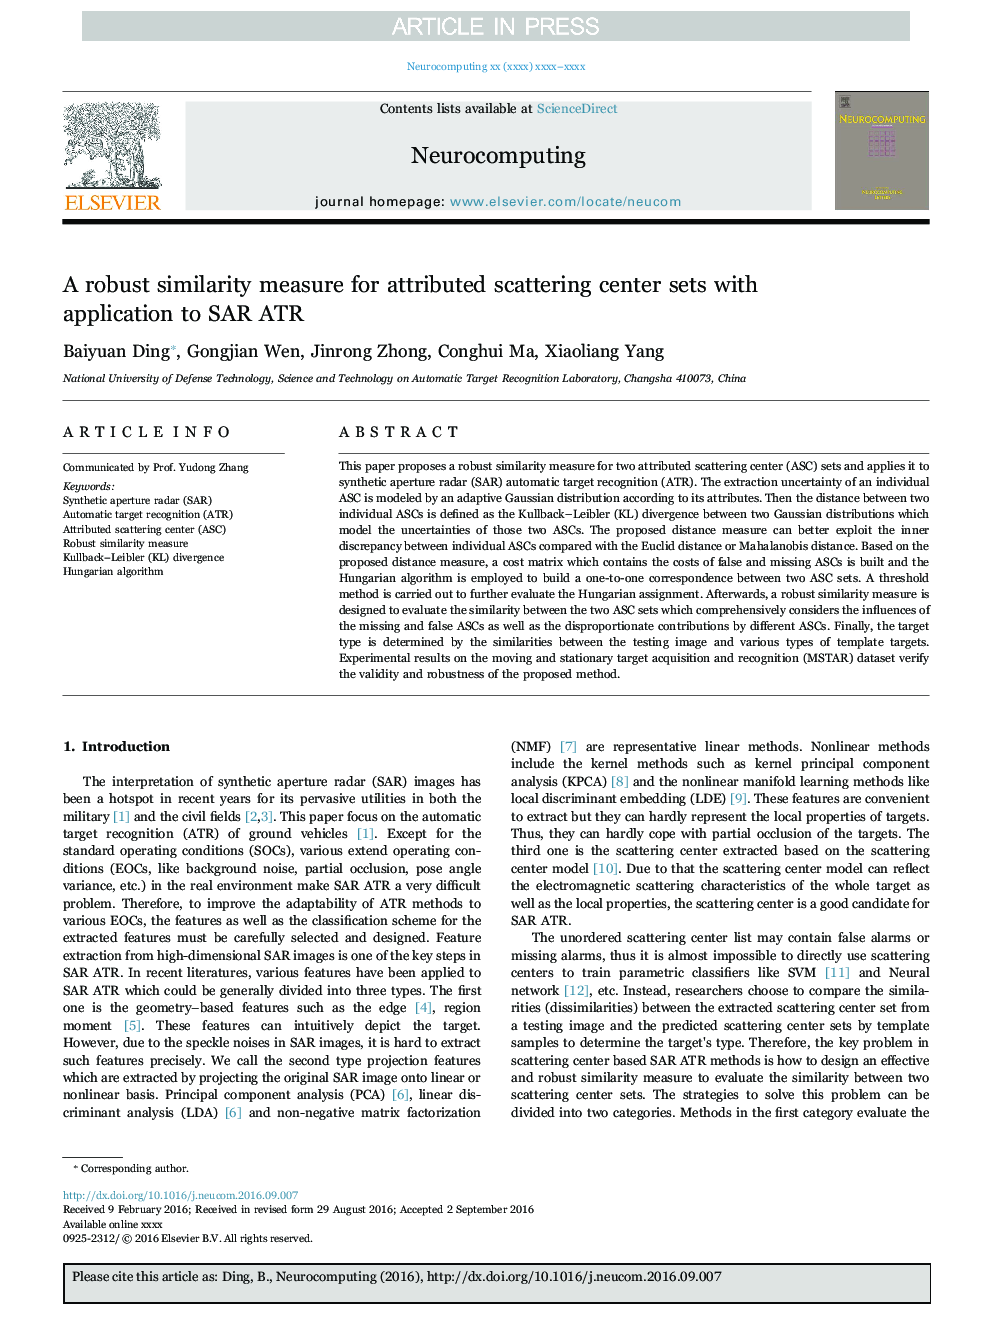 A robust similarity measure for attributed scattering center sets with application to SAR ATR